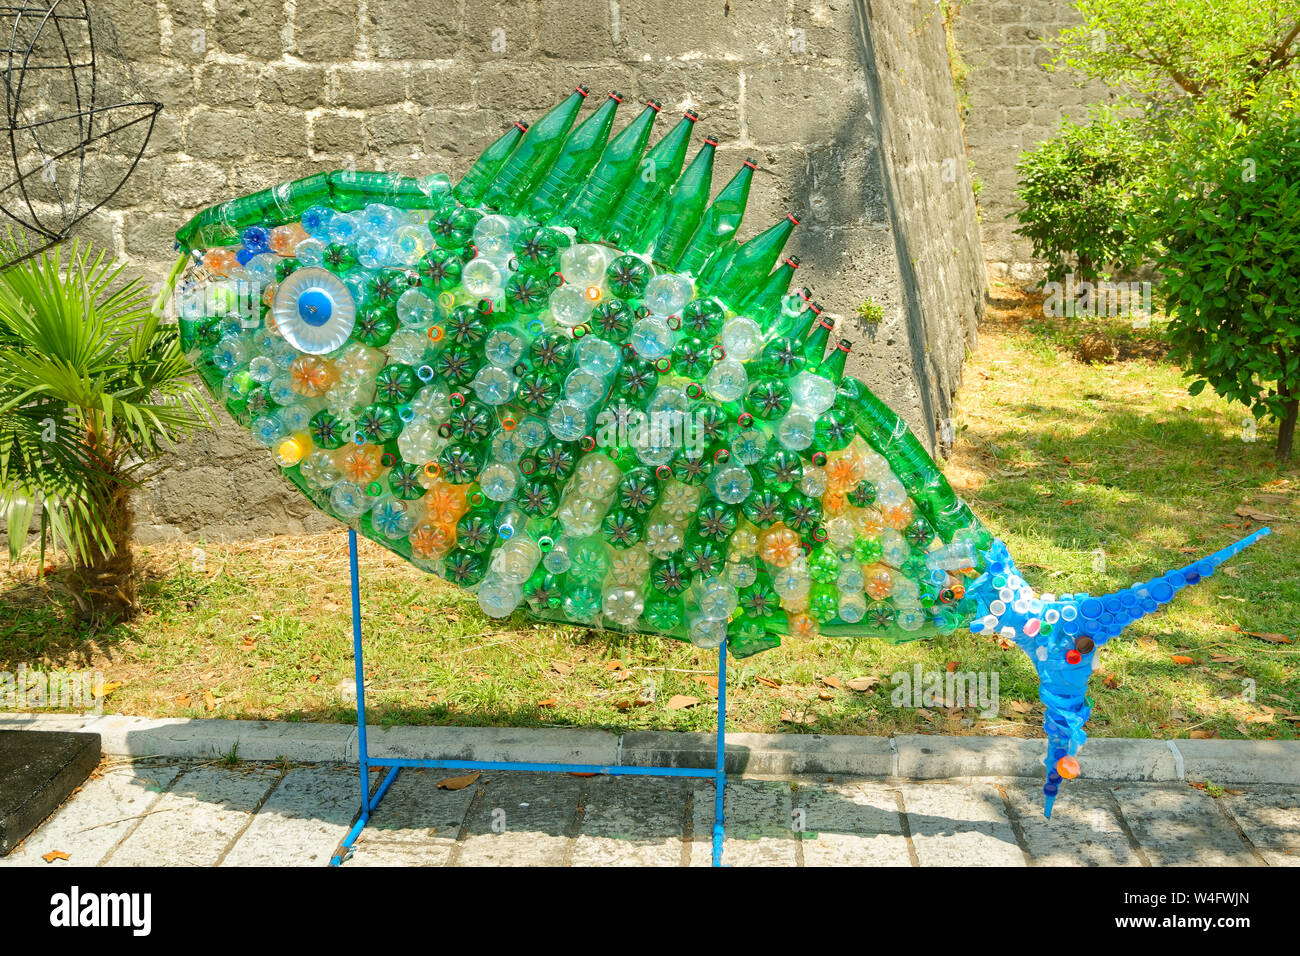 Fish feature created from plastic waste at Kotor in Montenegro. Stock Photo